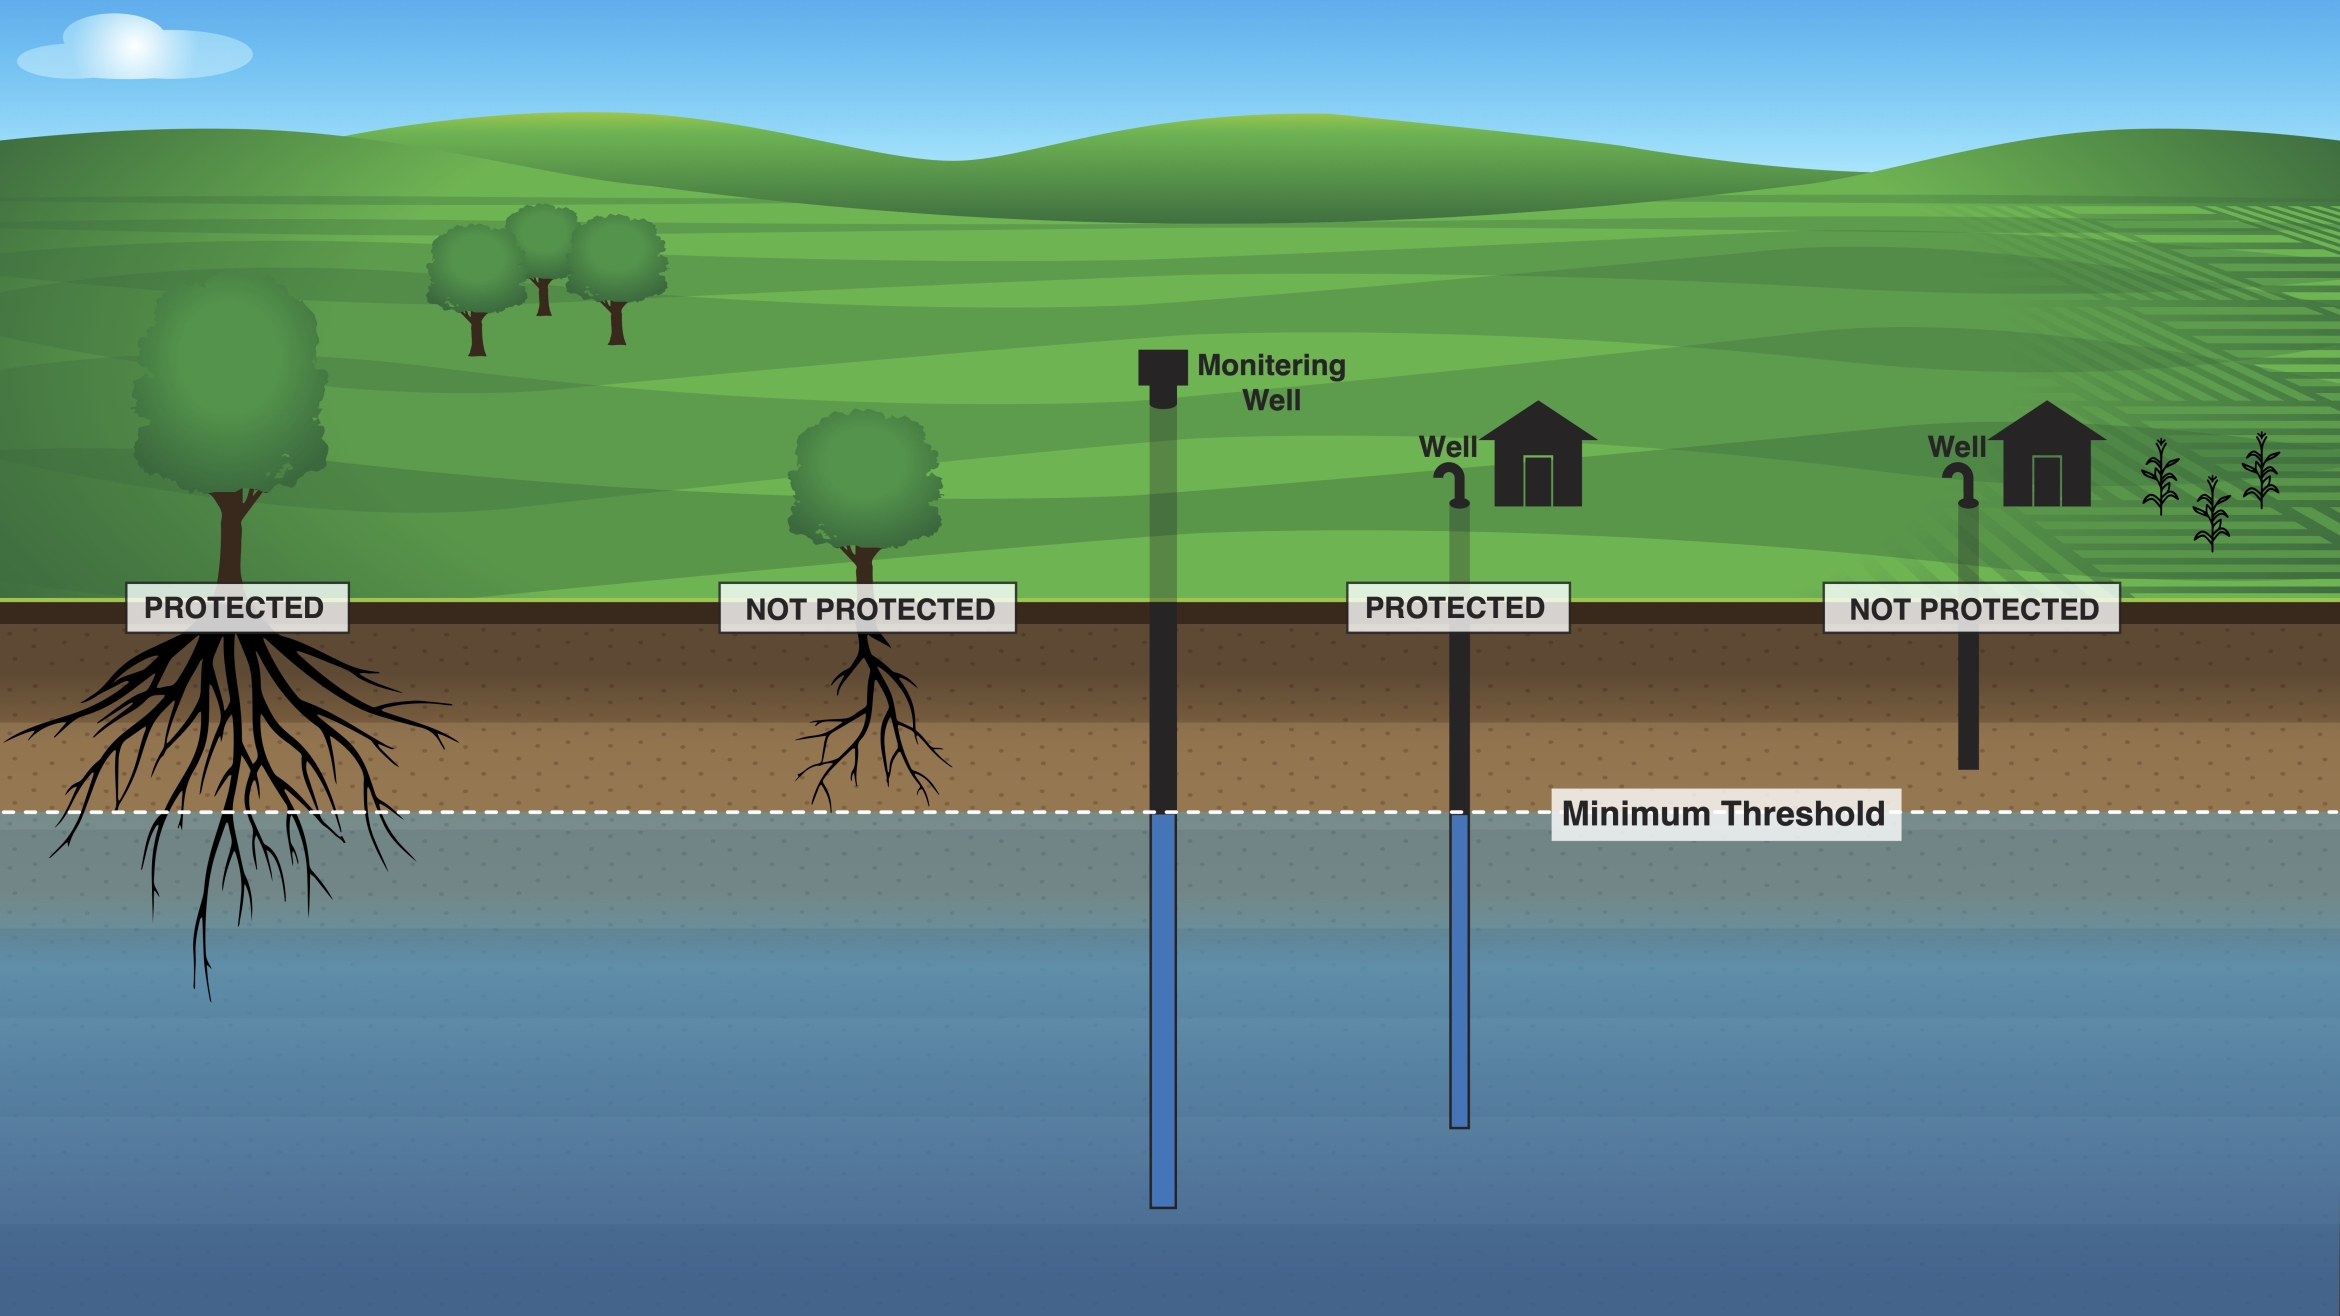 Tree roots and wells extending to various depths are compared to the aquifer’s minimum threshold the policy established for the underlying aquifer.